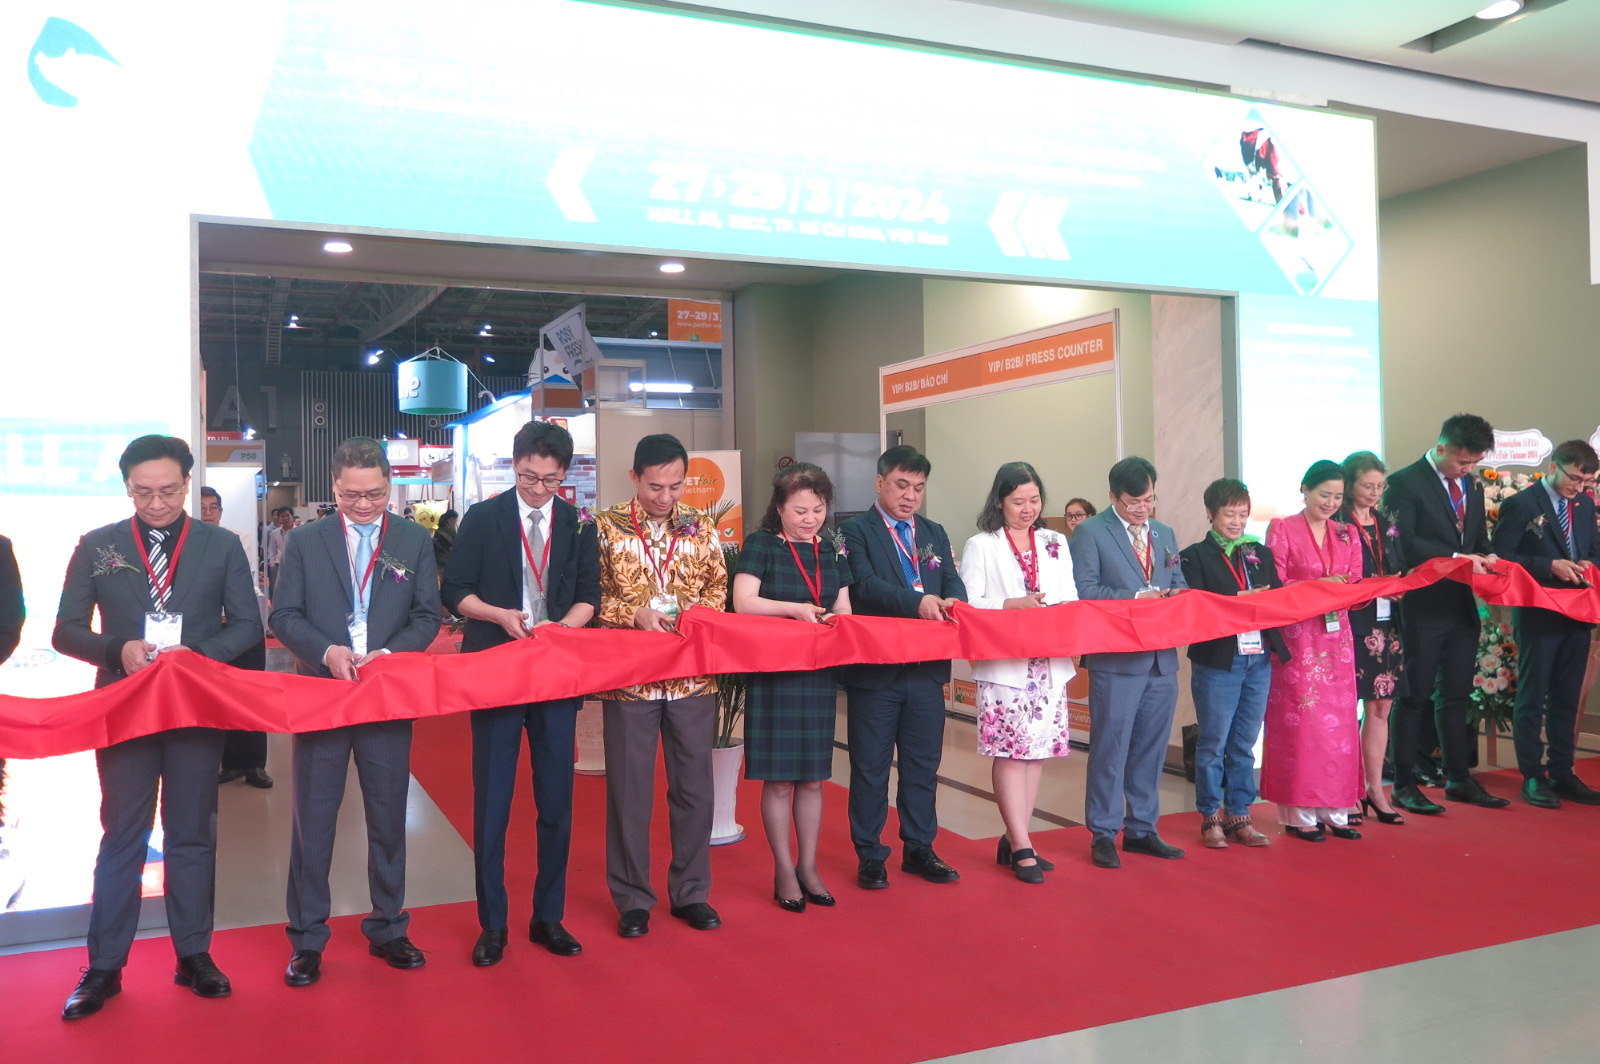 An international trade fair for the pet industry opened at the Saigon Exhibition and Convention Centre in HCM City on March 27.